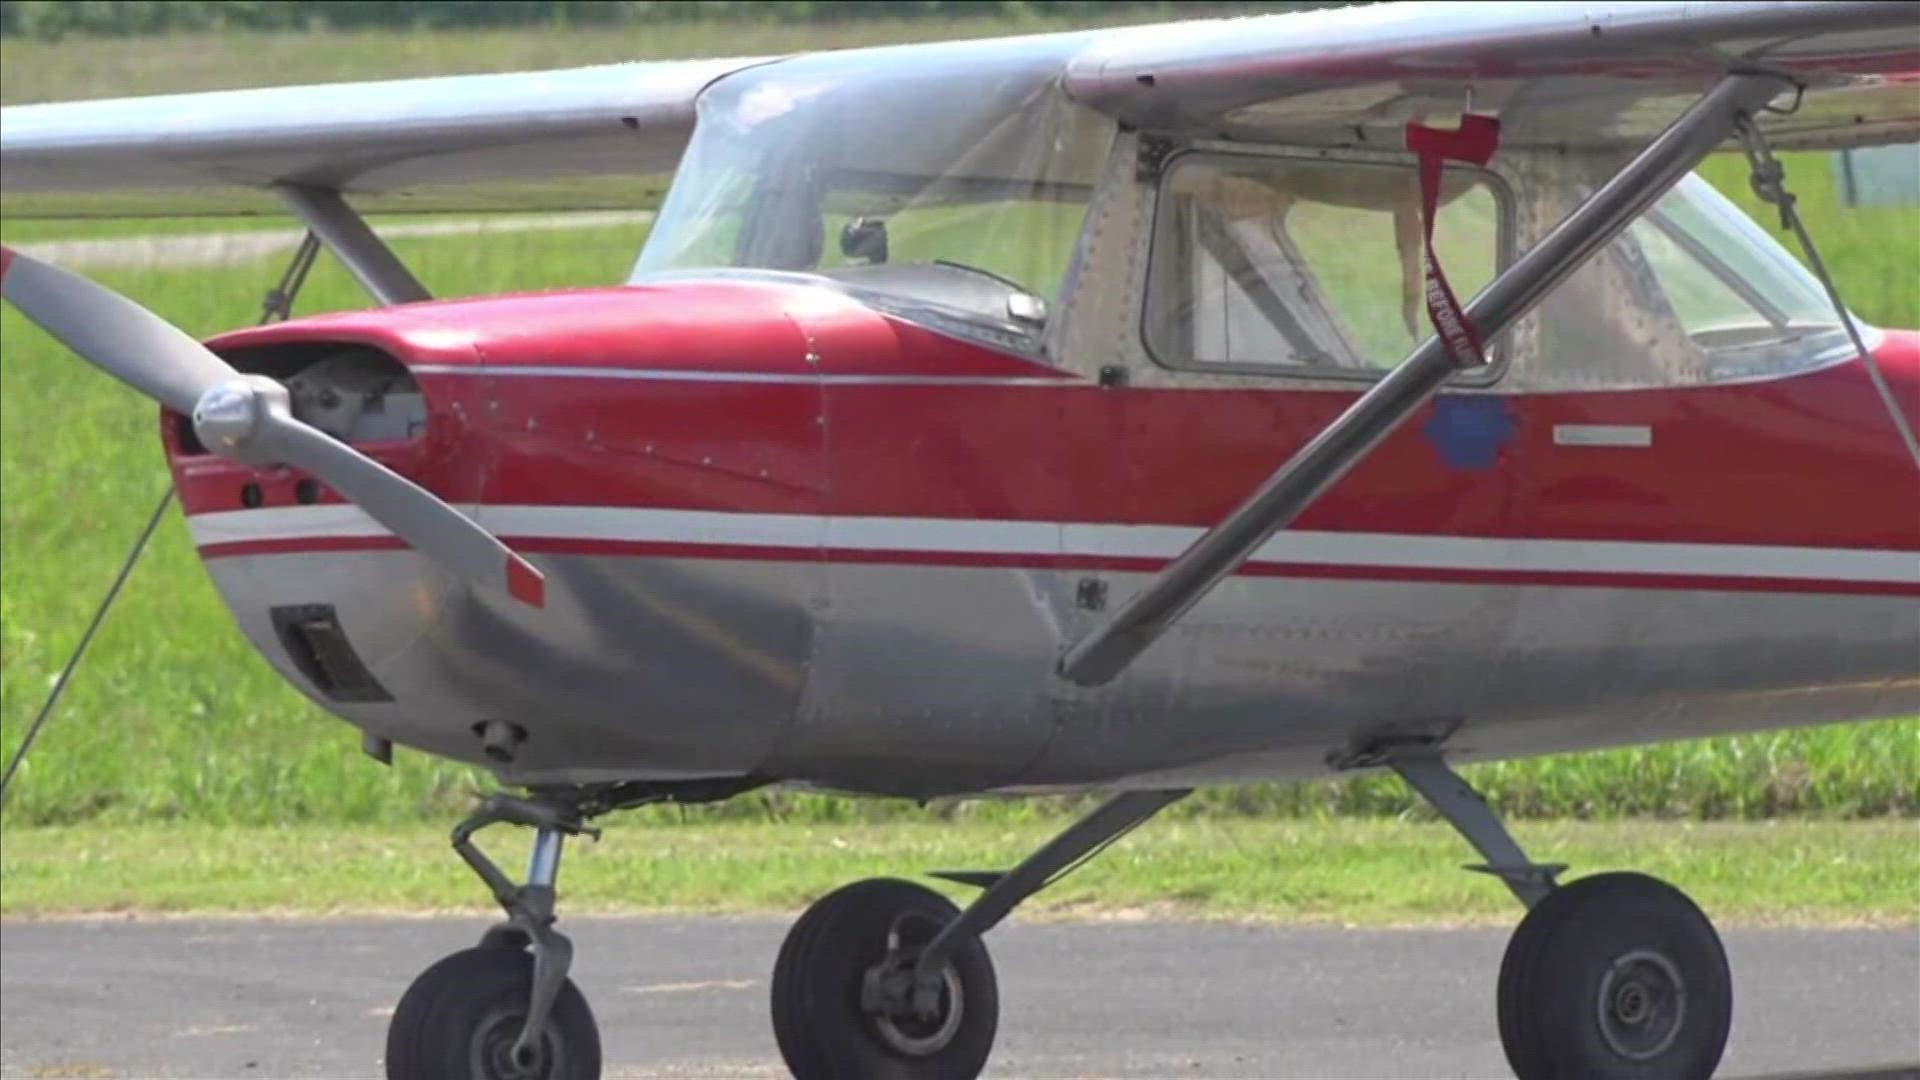 ABC24’s Zaria Oates spoke with instructors at Luke Weathers Flight Academy about how they are bringing a diverse range of pilots into the aviation field.